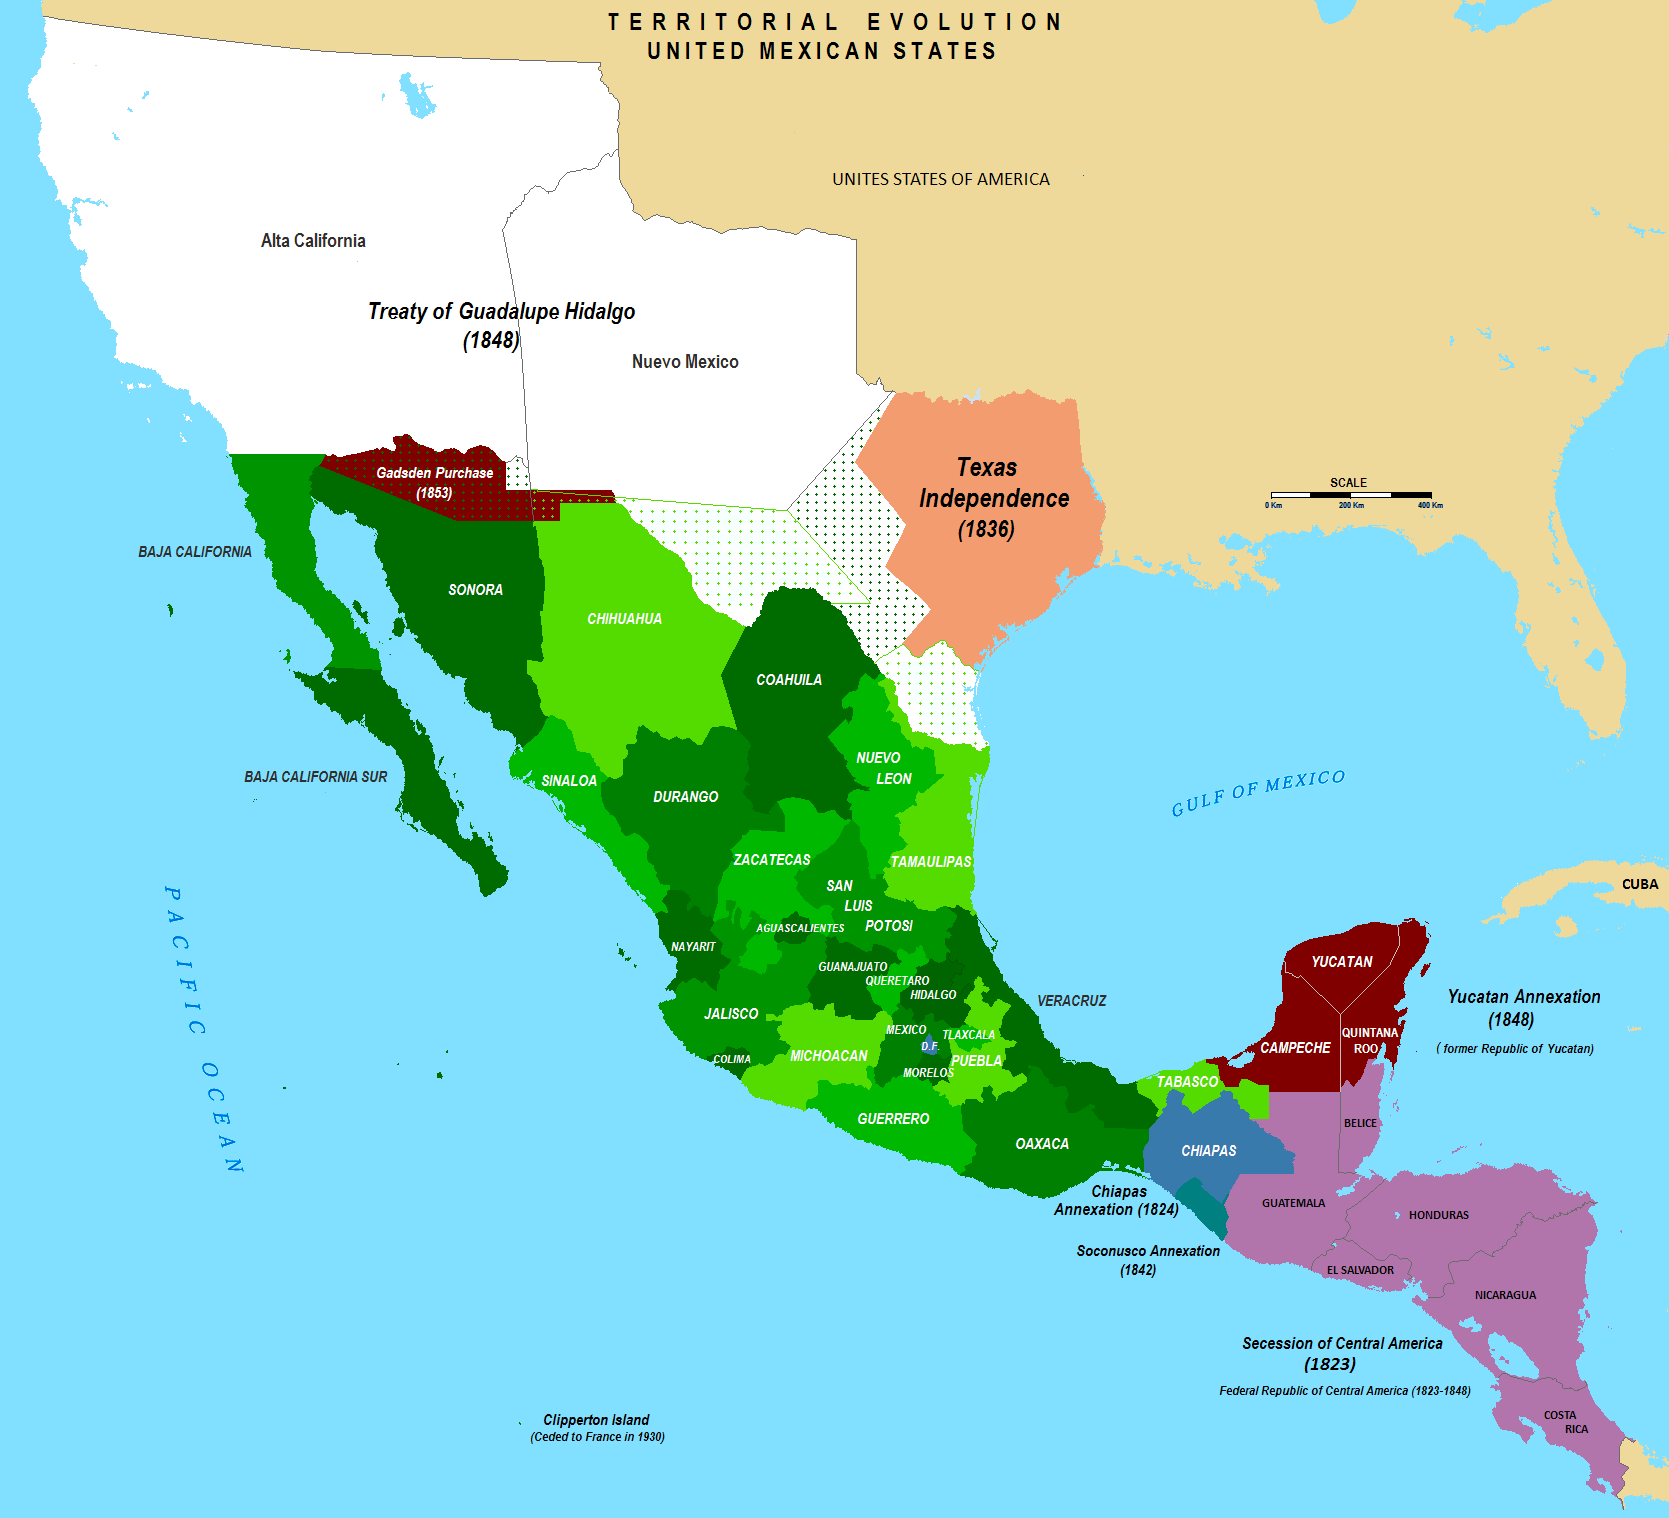 Territorial Evolution Map of Mexico